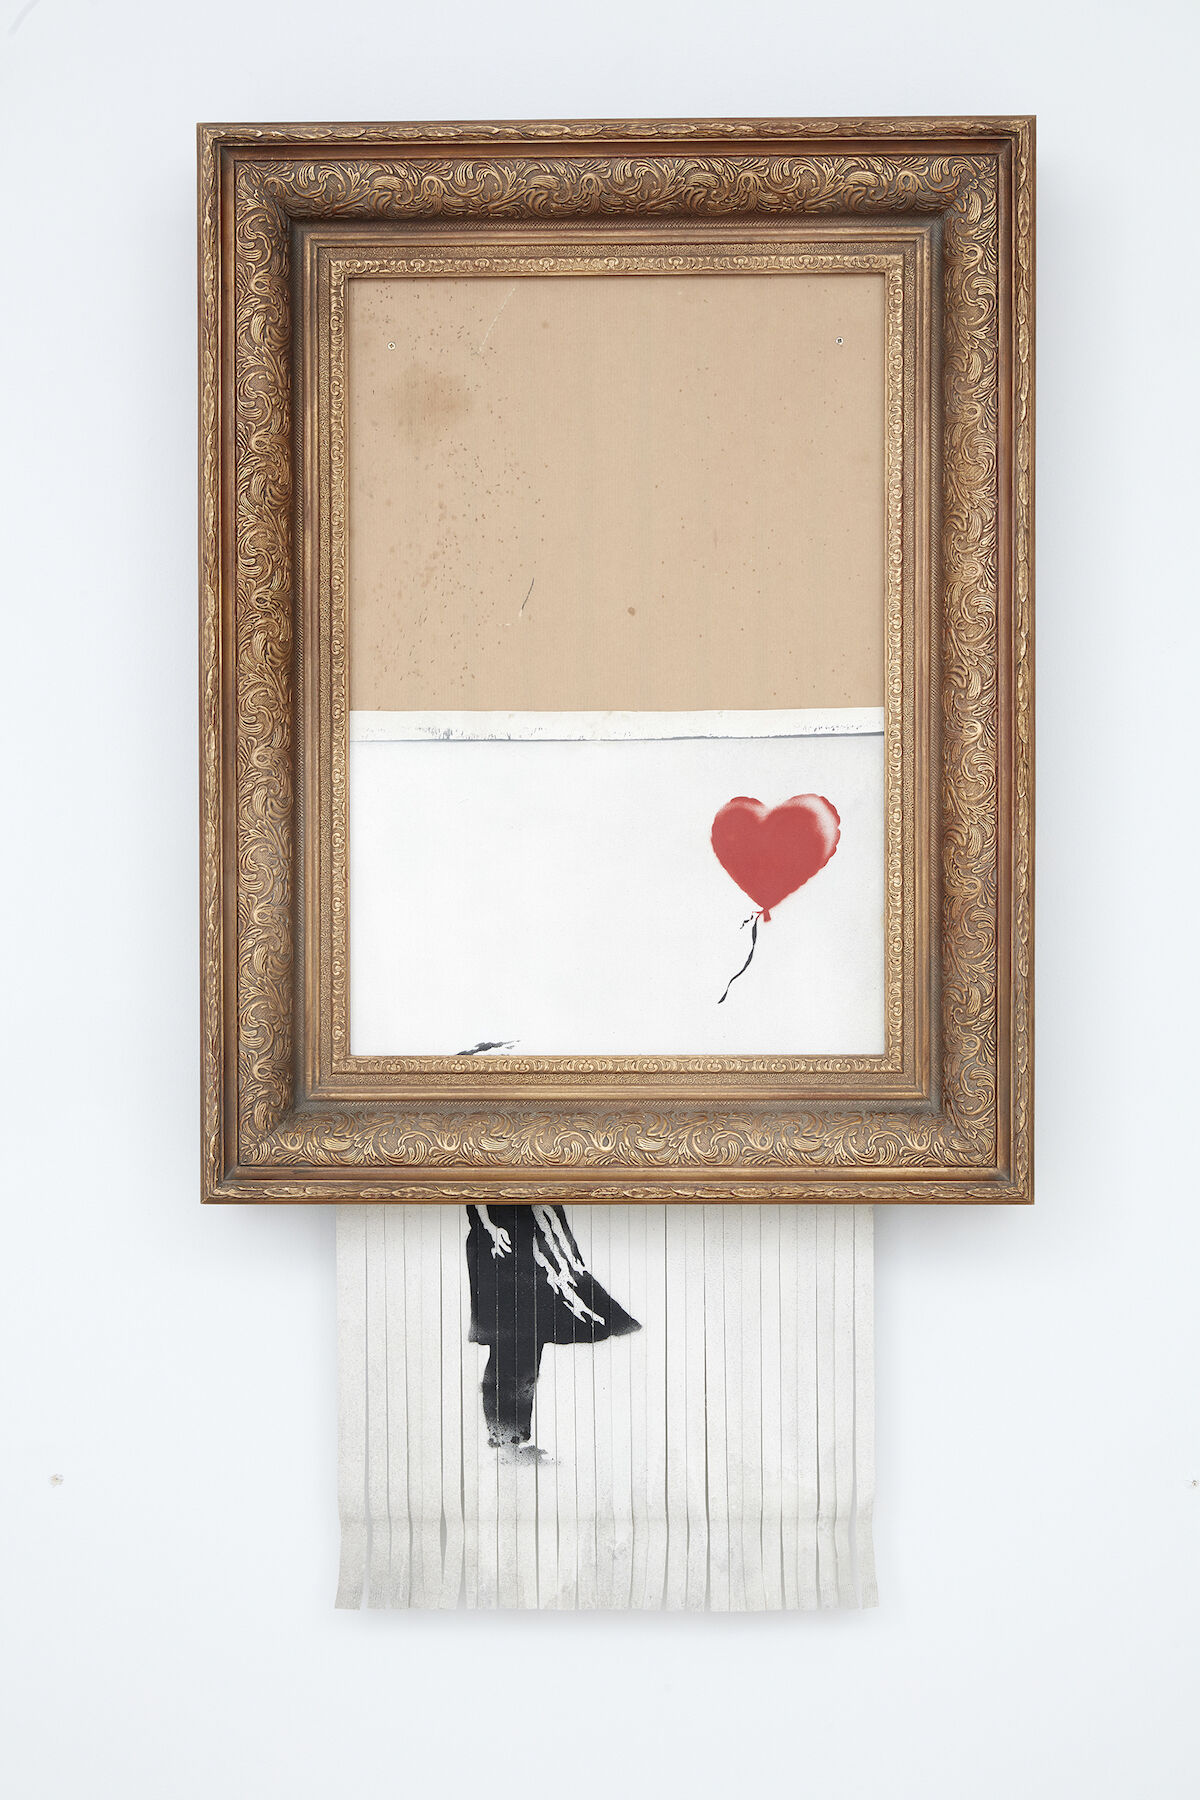 Bansky, Love is in the Bin, 2018. Sold for £1,042,000. Courtesy Sotheby’s.